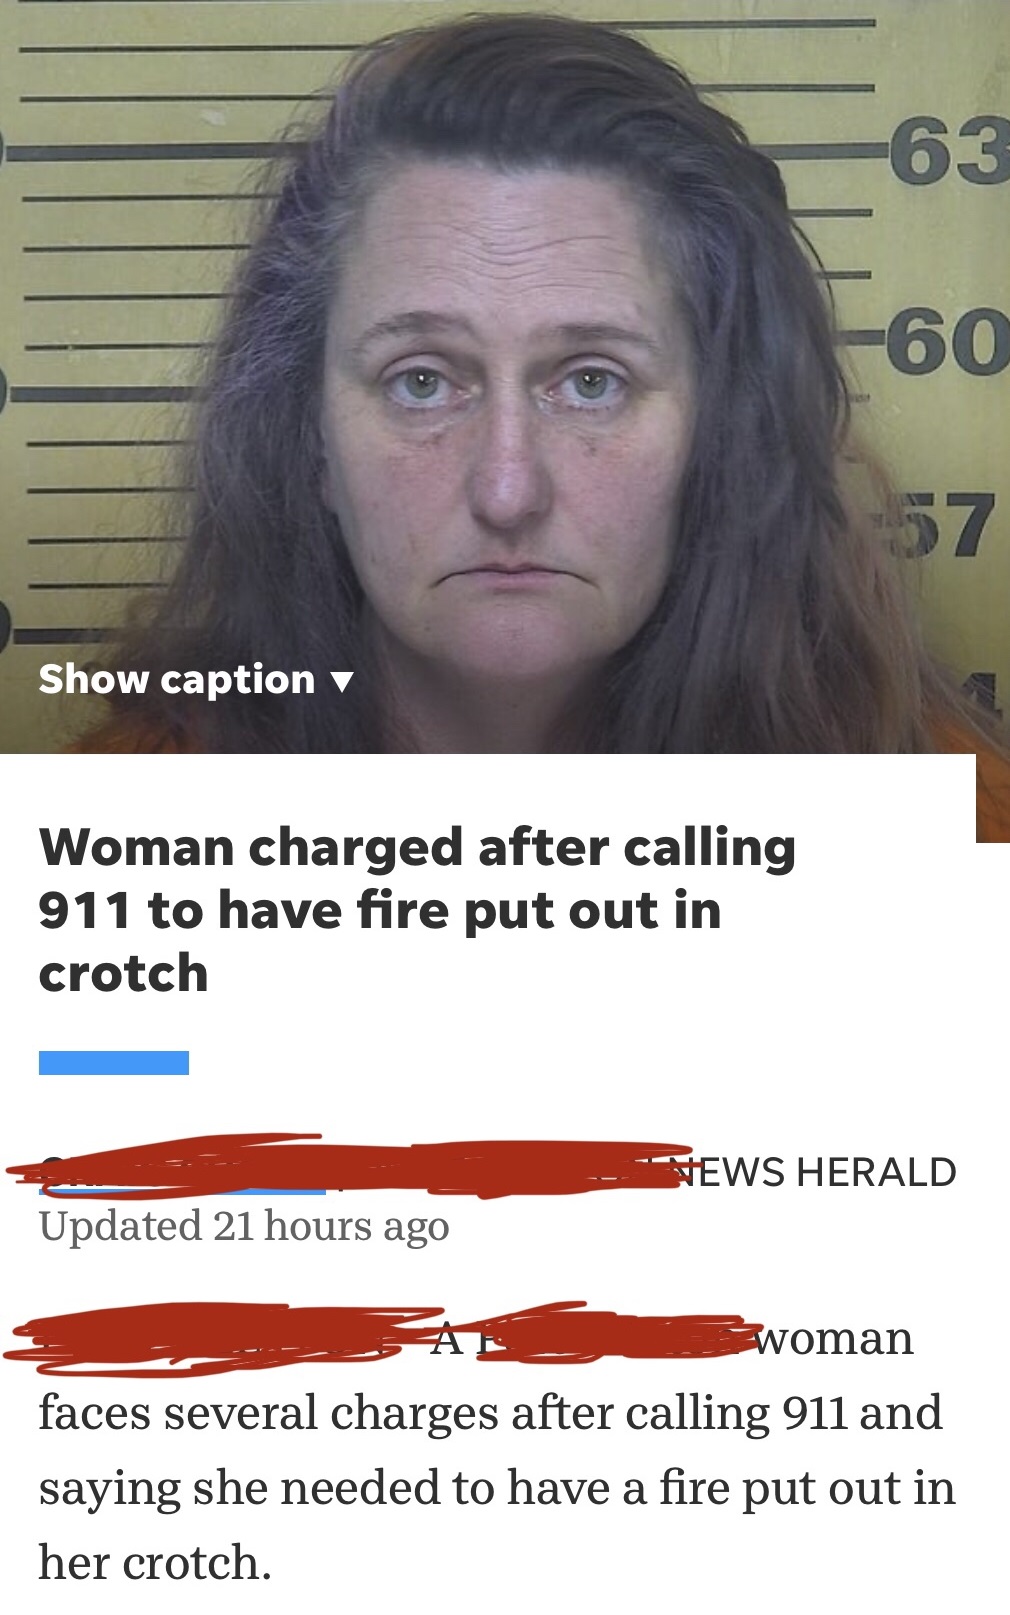 photo caption - E63 60 57 Show caption Woman charged after calling 911 to have fire put out in crotch News Herald Updated 21 hours ago woman faces several charges after calling 911 and saying she needed to have a fire put out in her crotch.